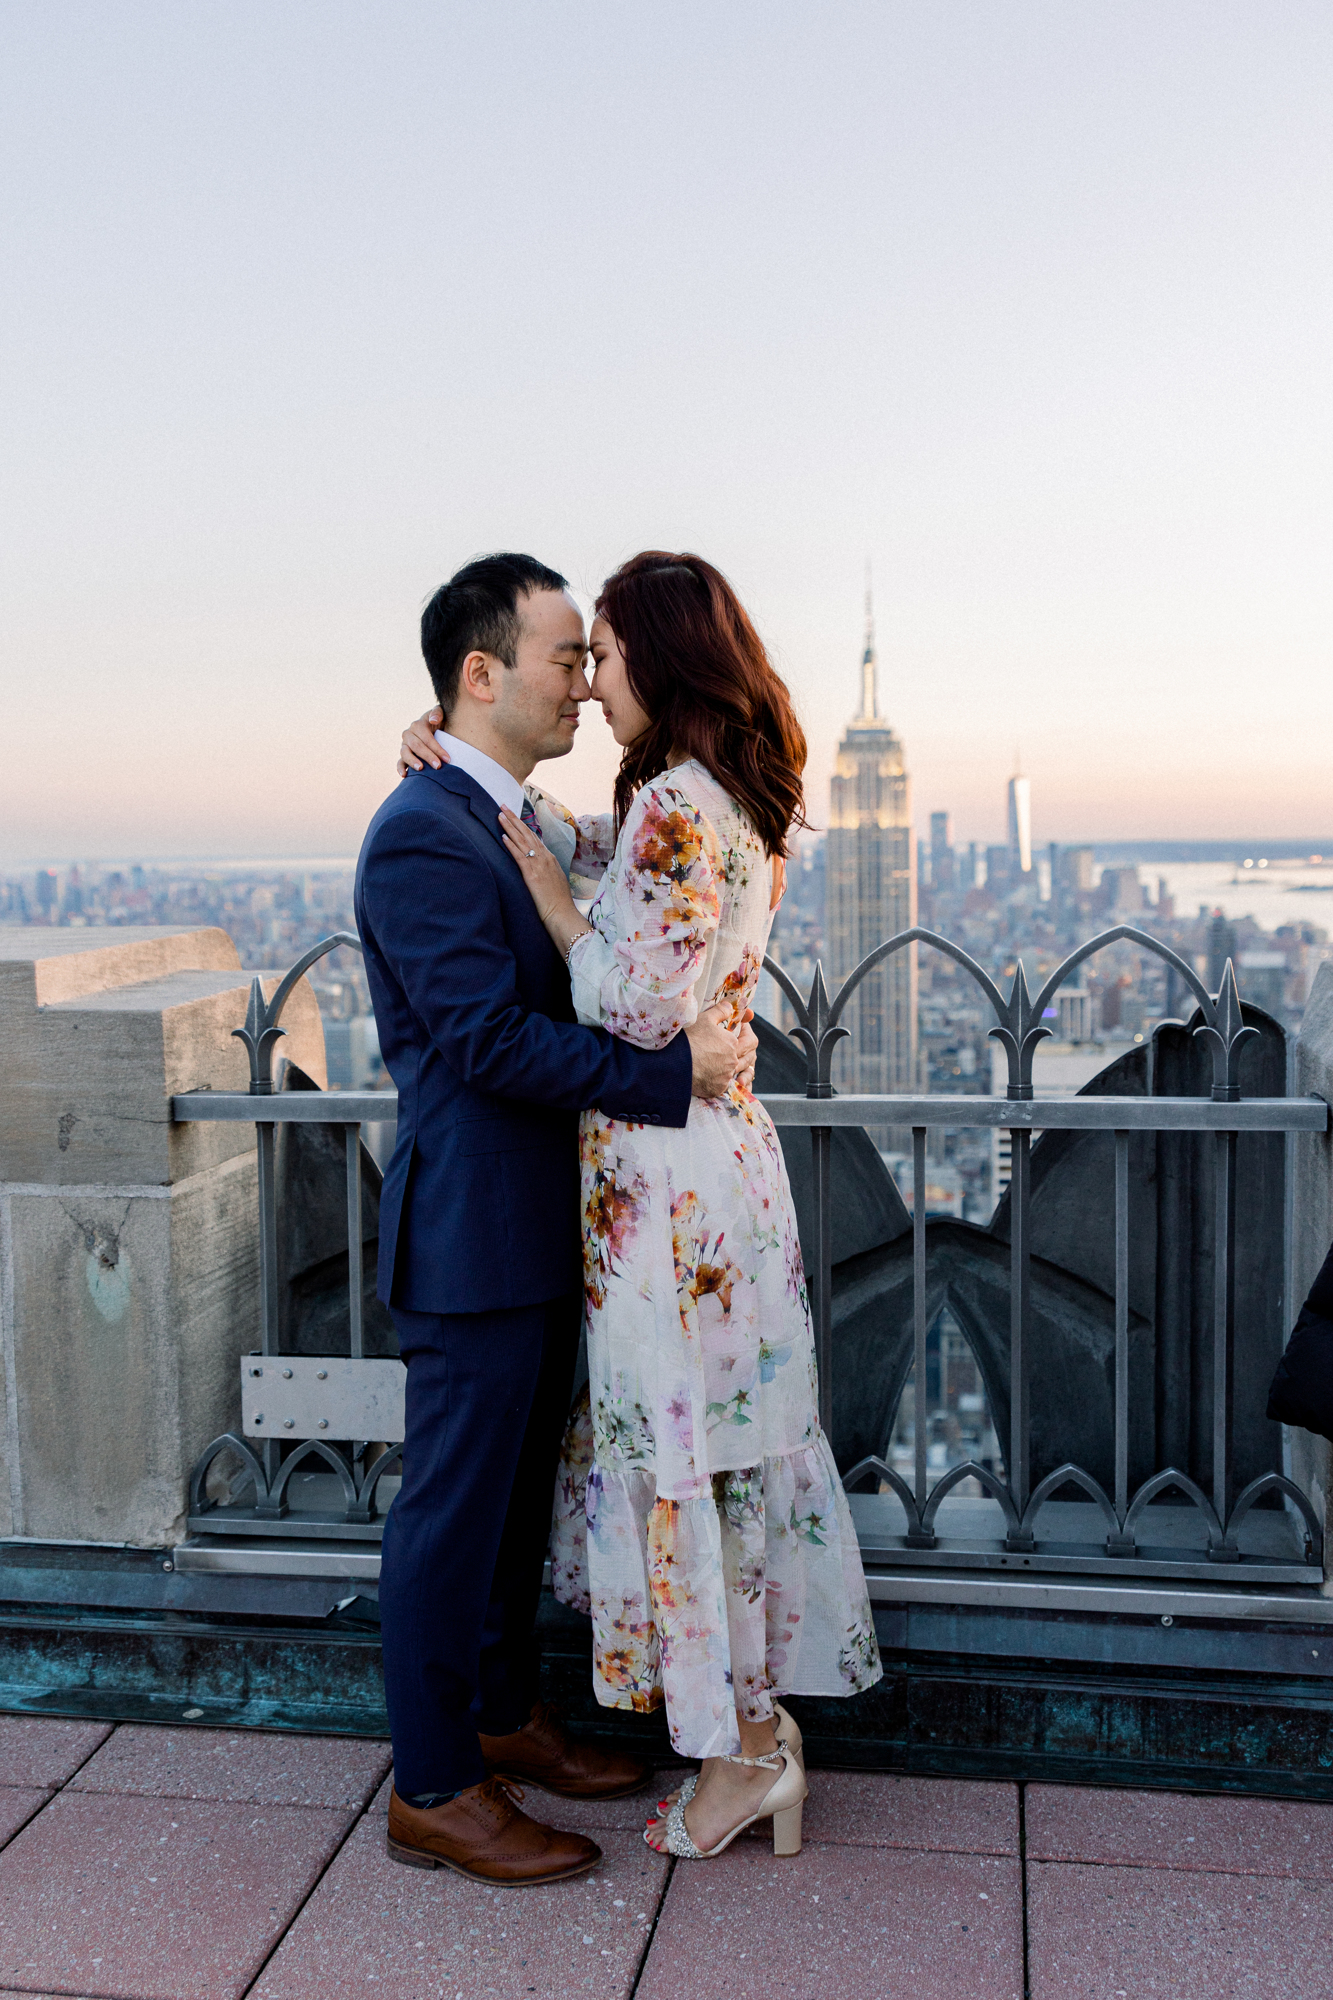 Extraordinary Top of the Rock Engagement Photography at Sunset in NYC